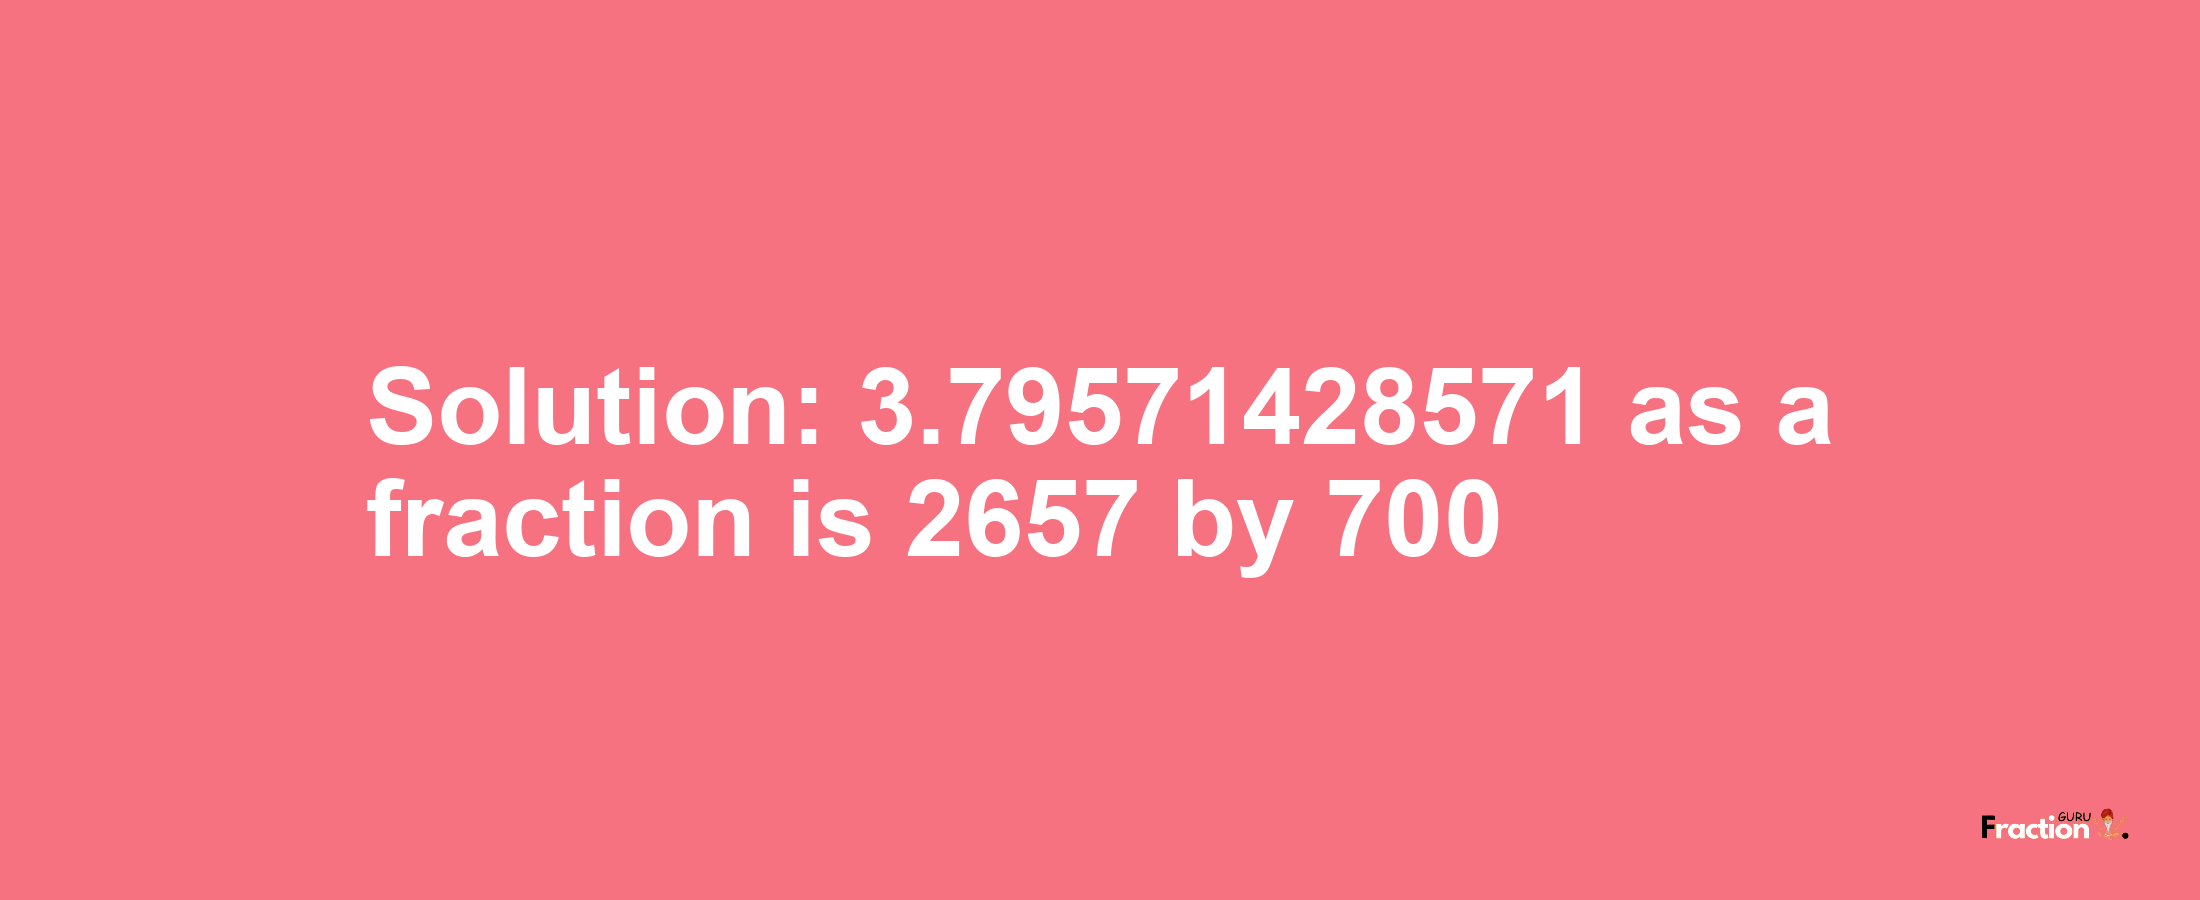 Solution:3.79571428571 as a fraction is 2657/700